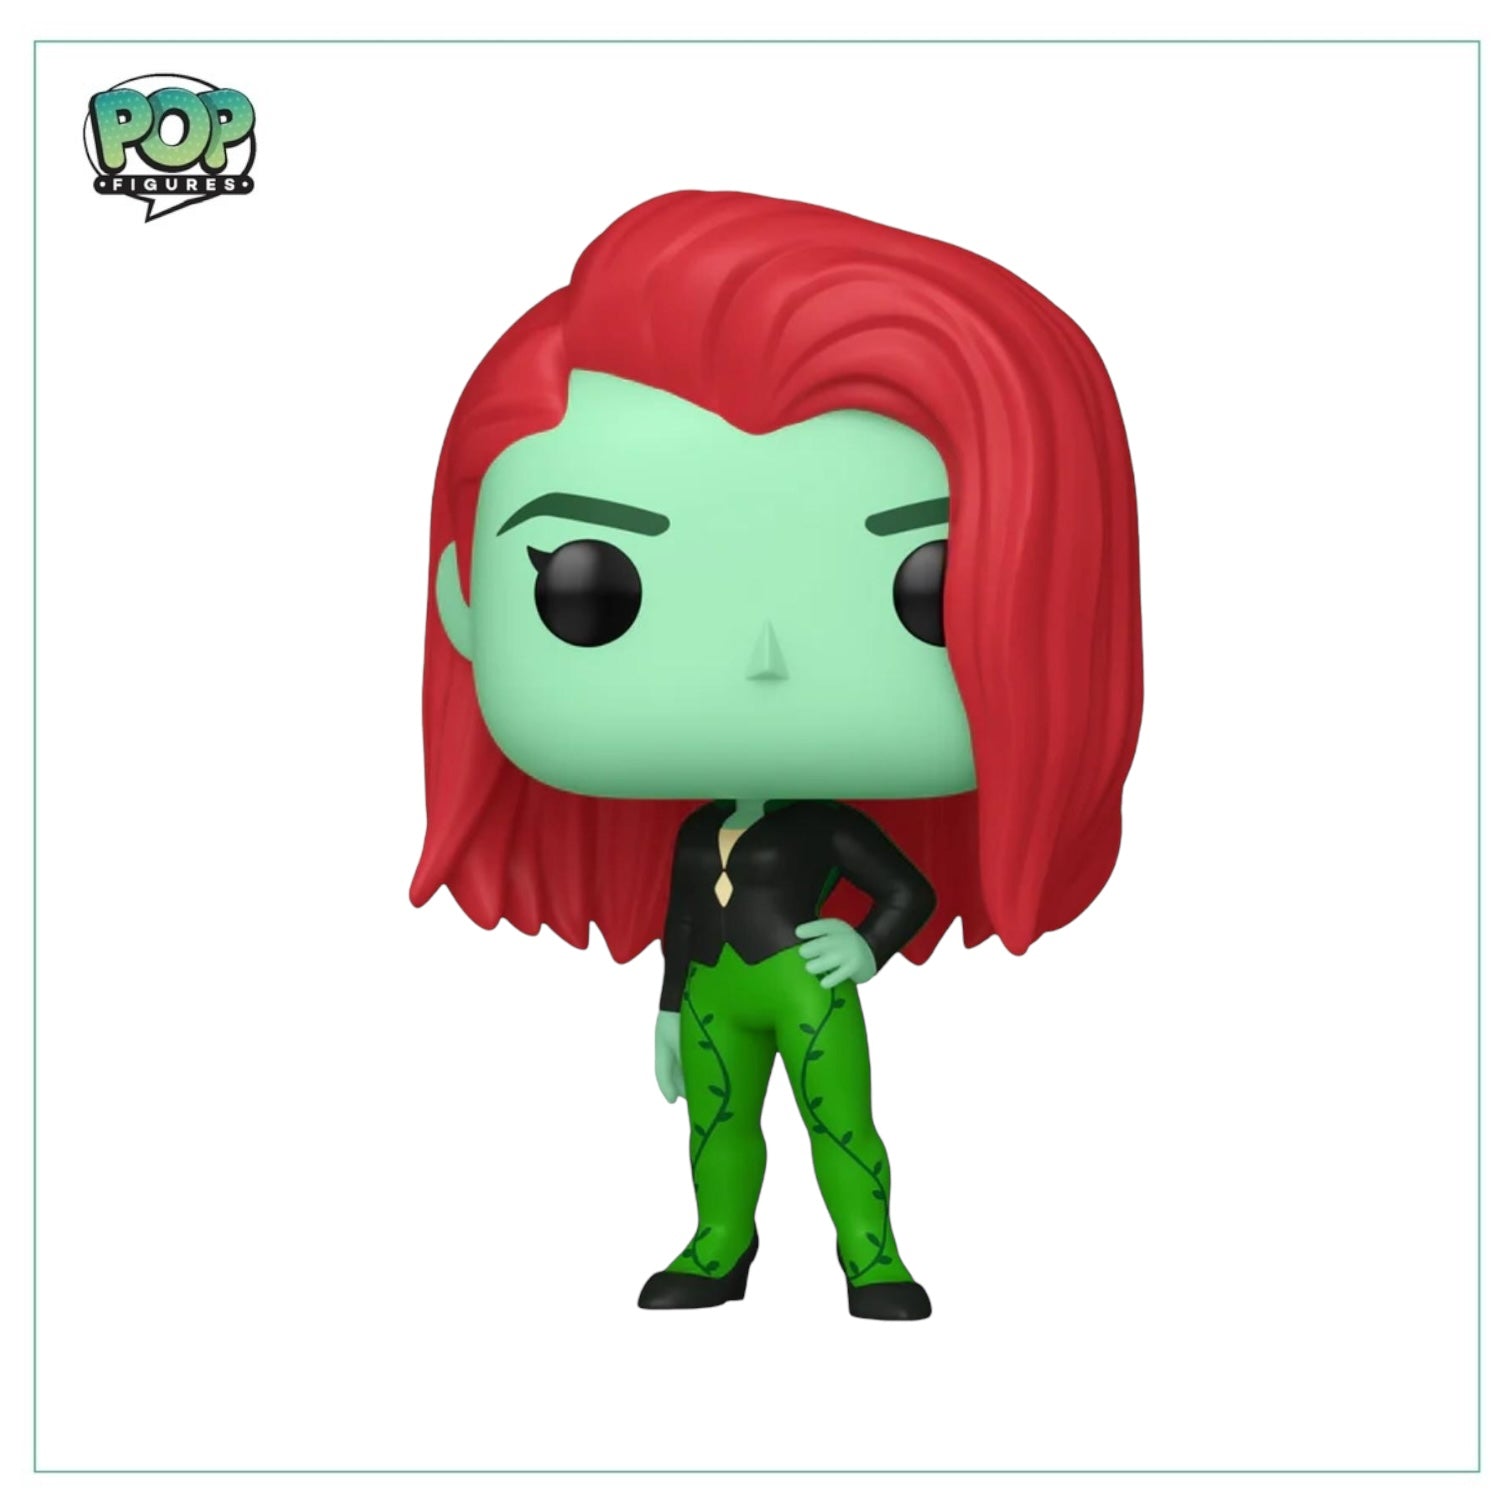 Poison Ivy #495 Funko Pop - Harley Quinn Animated Series